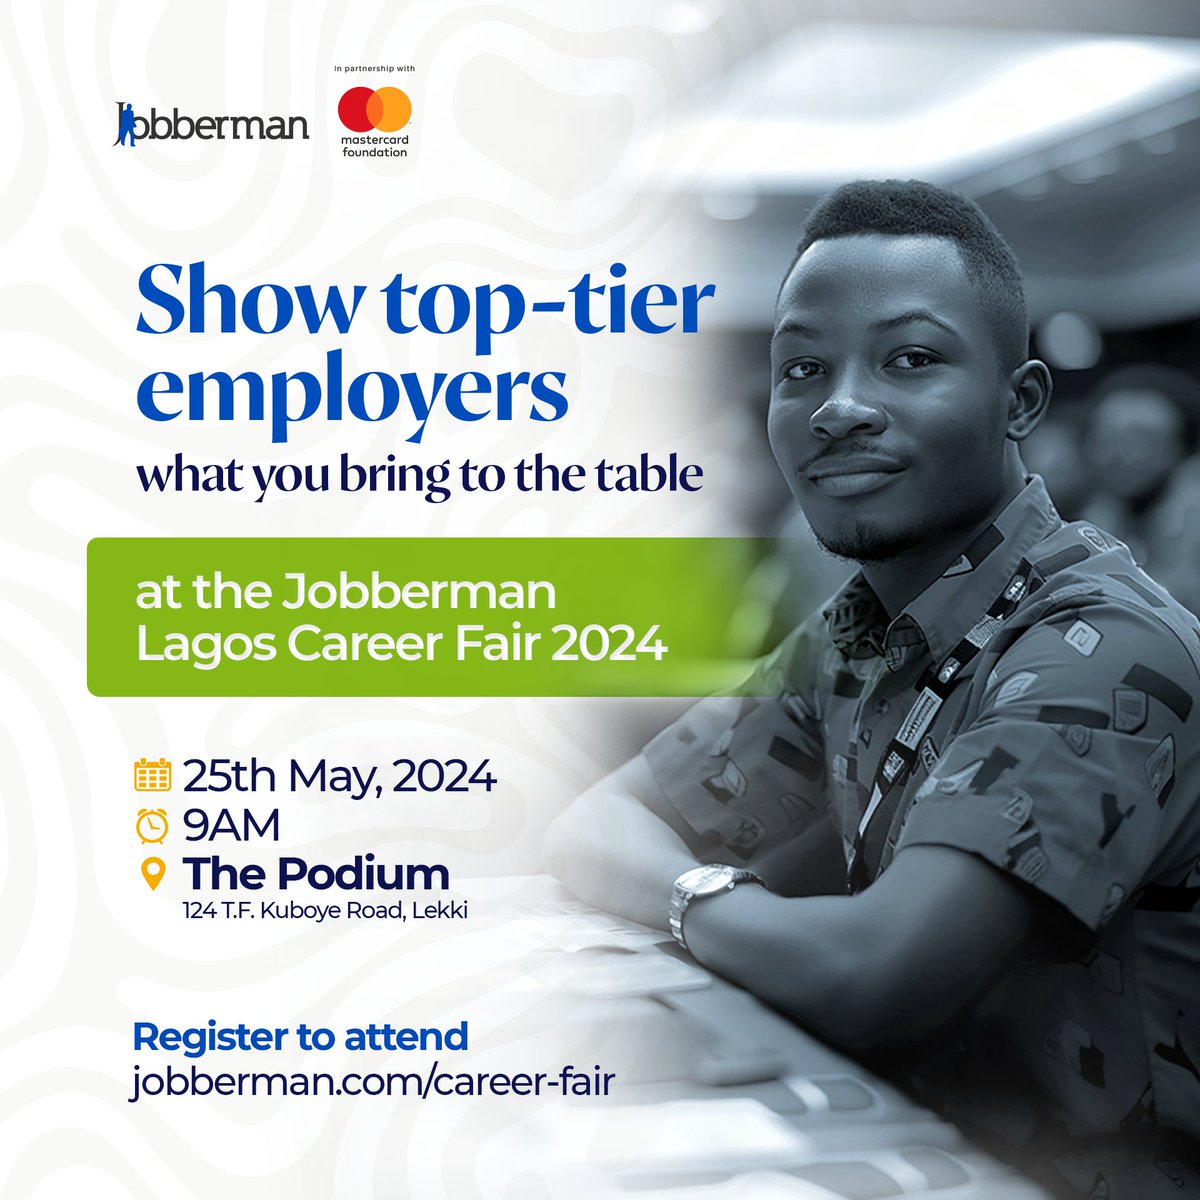 This event allows you to meet top employers, grow your professional network, and discover exciting job prospects. Take advantage of this opportunity to advance your career, learn from industry experts, and network with key professionals in your field at the @Jobbermandotcom